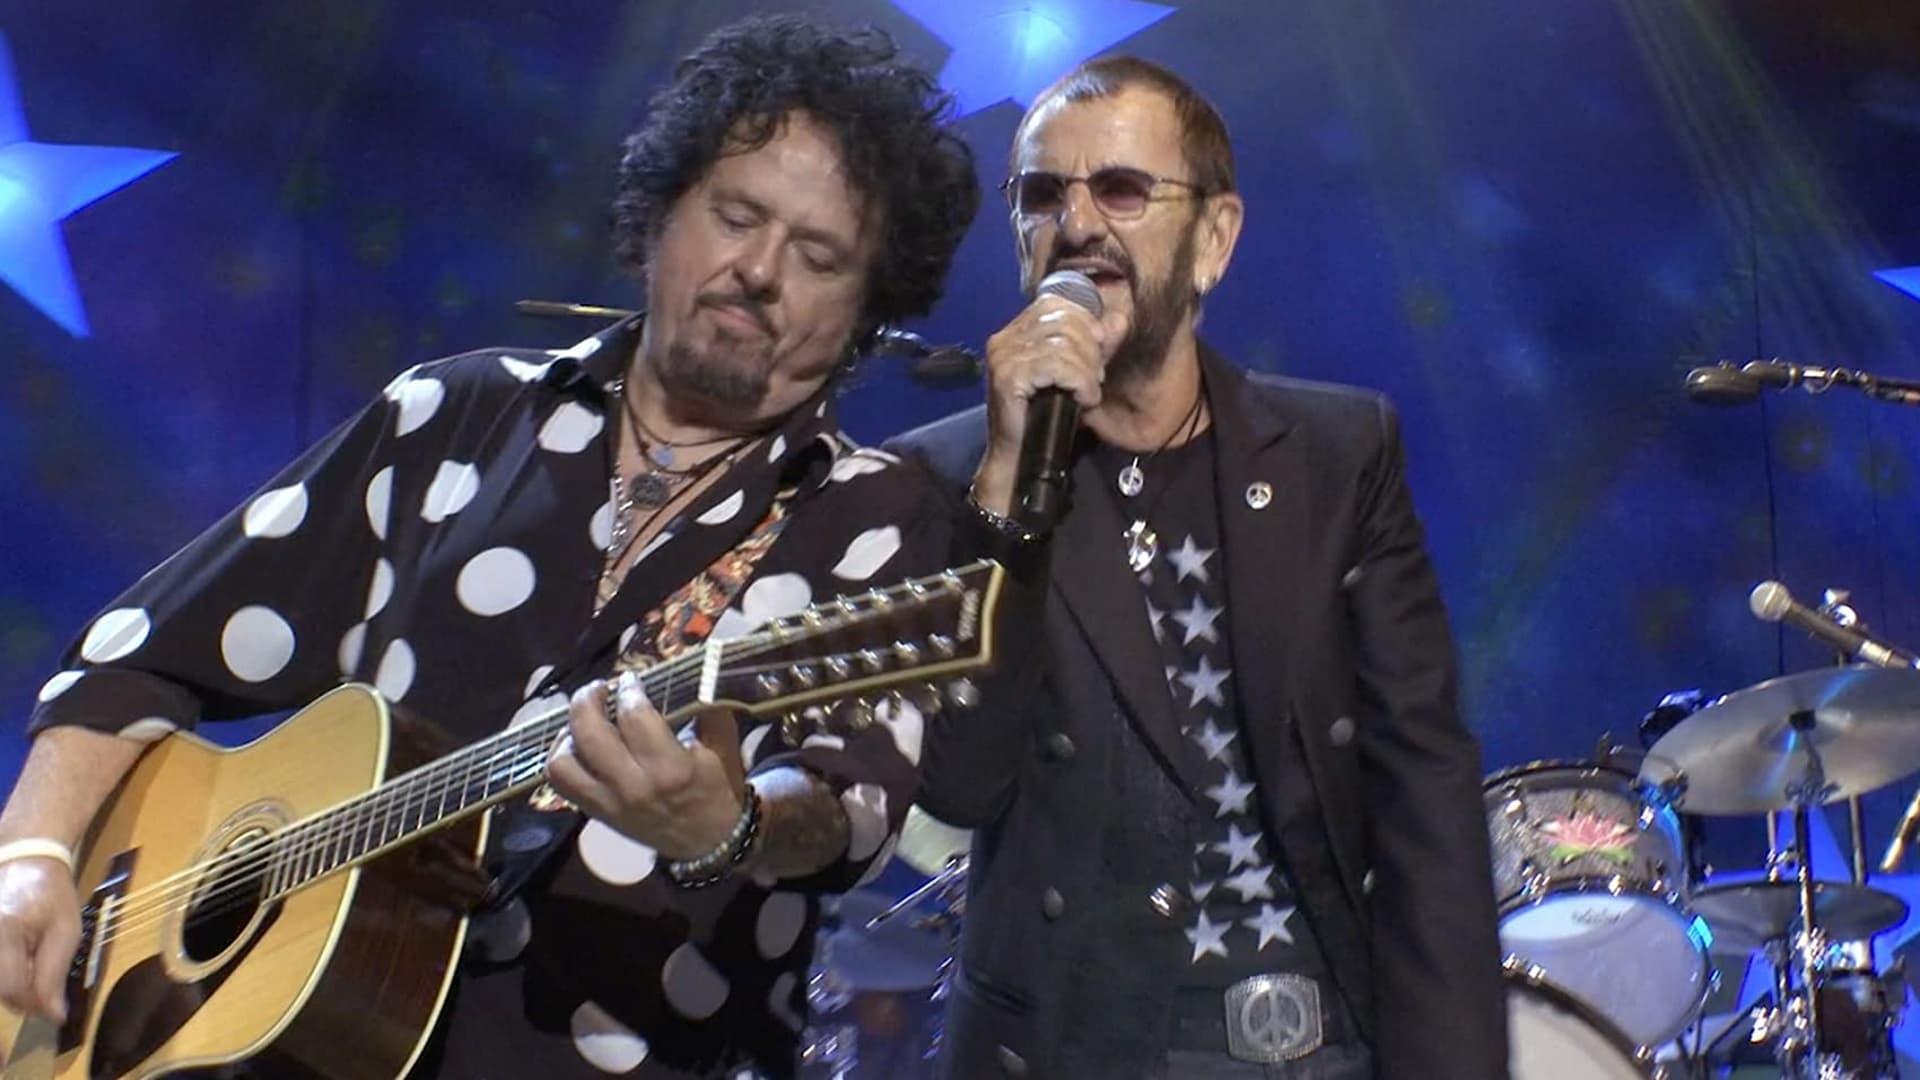 Ringo Starr and His All-Starr Band: Live at the Greek Theater 2019 backdrop